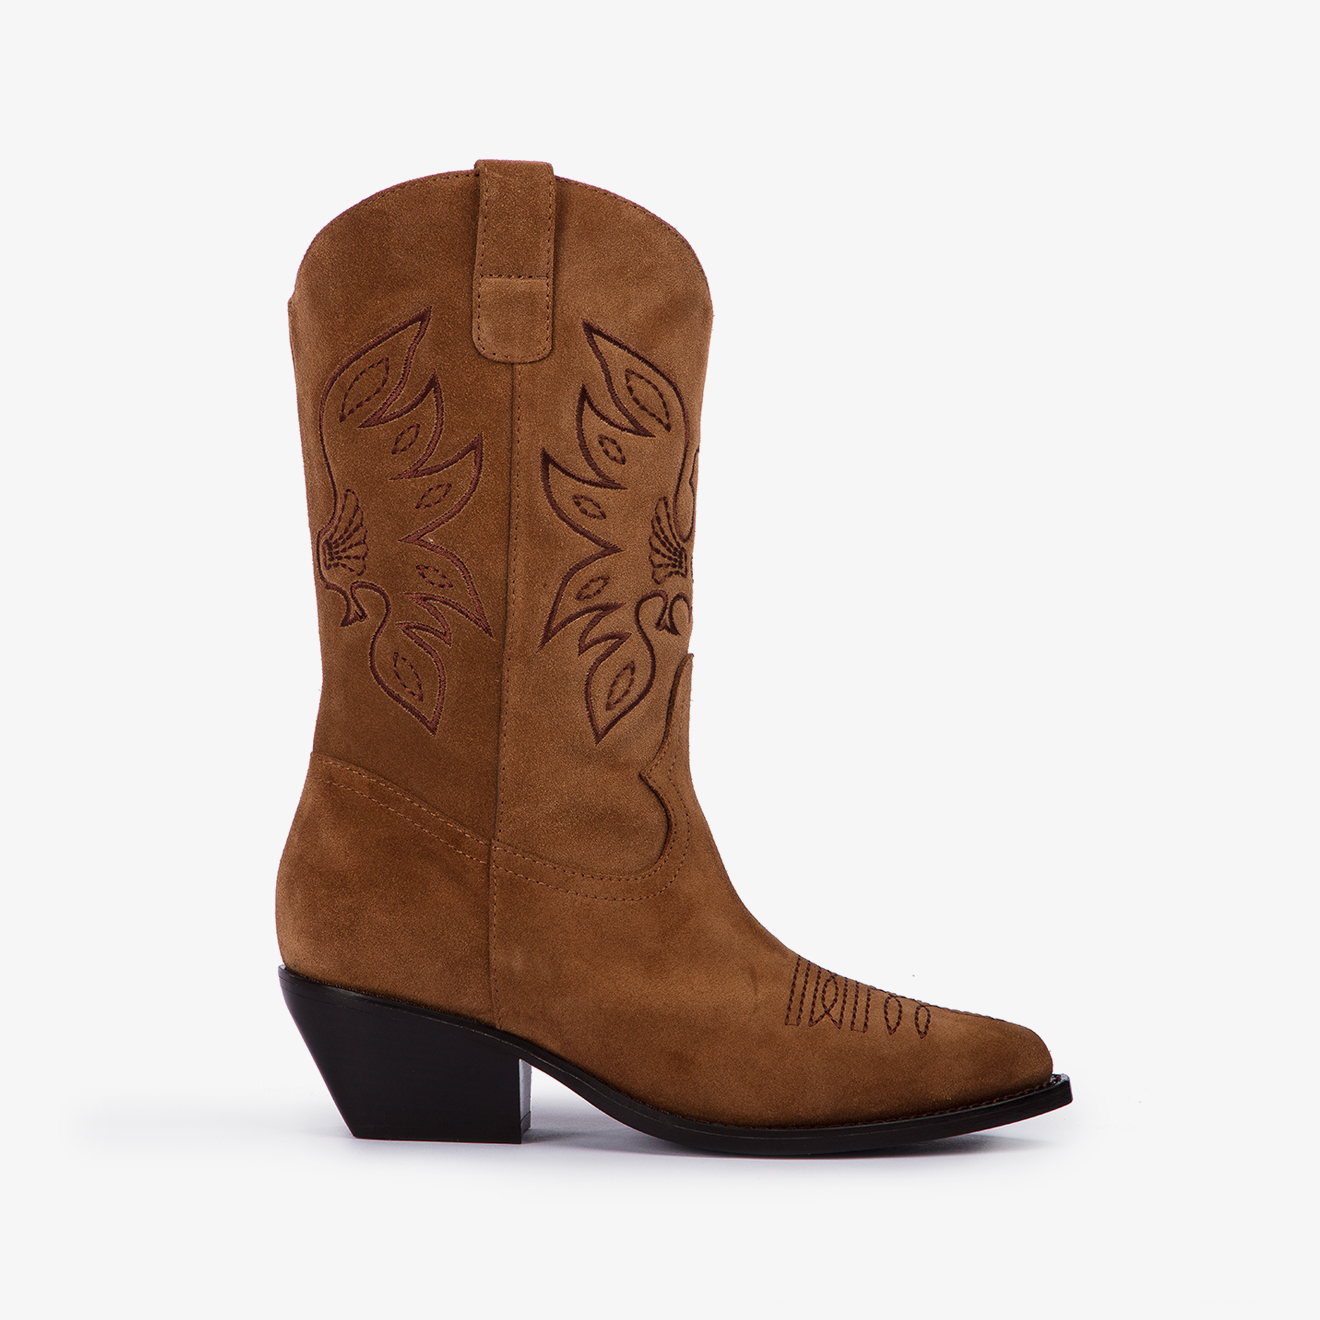 CHRISTINE BOOT 70 mm - Le Silla official outlet